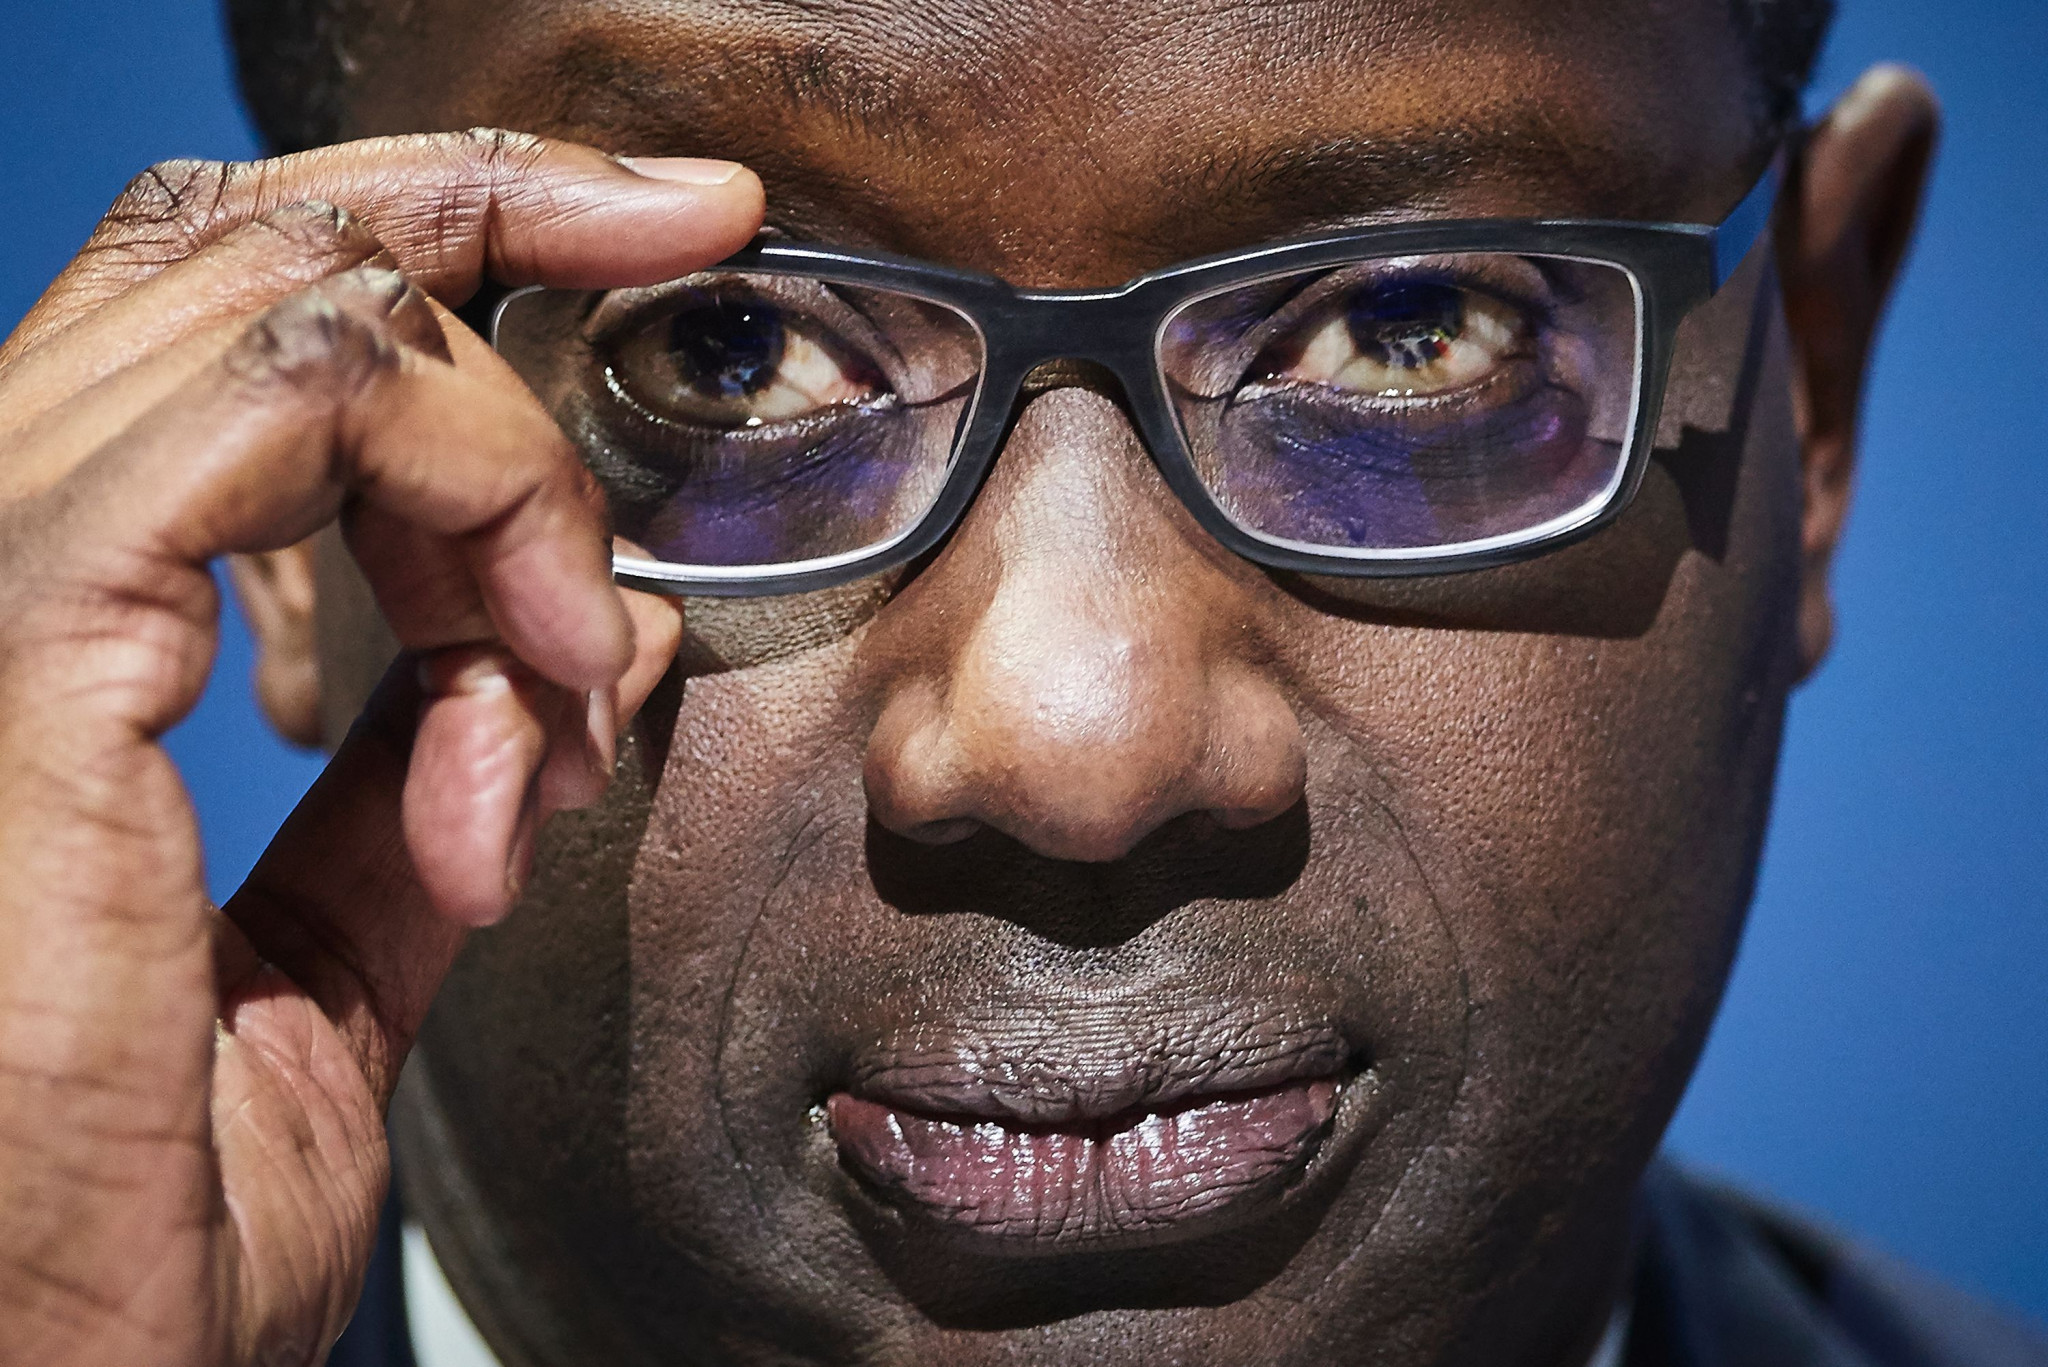 IOC member Thiam resigns as Credit Suisse chief executive after spying scandals